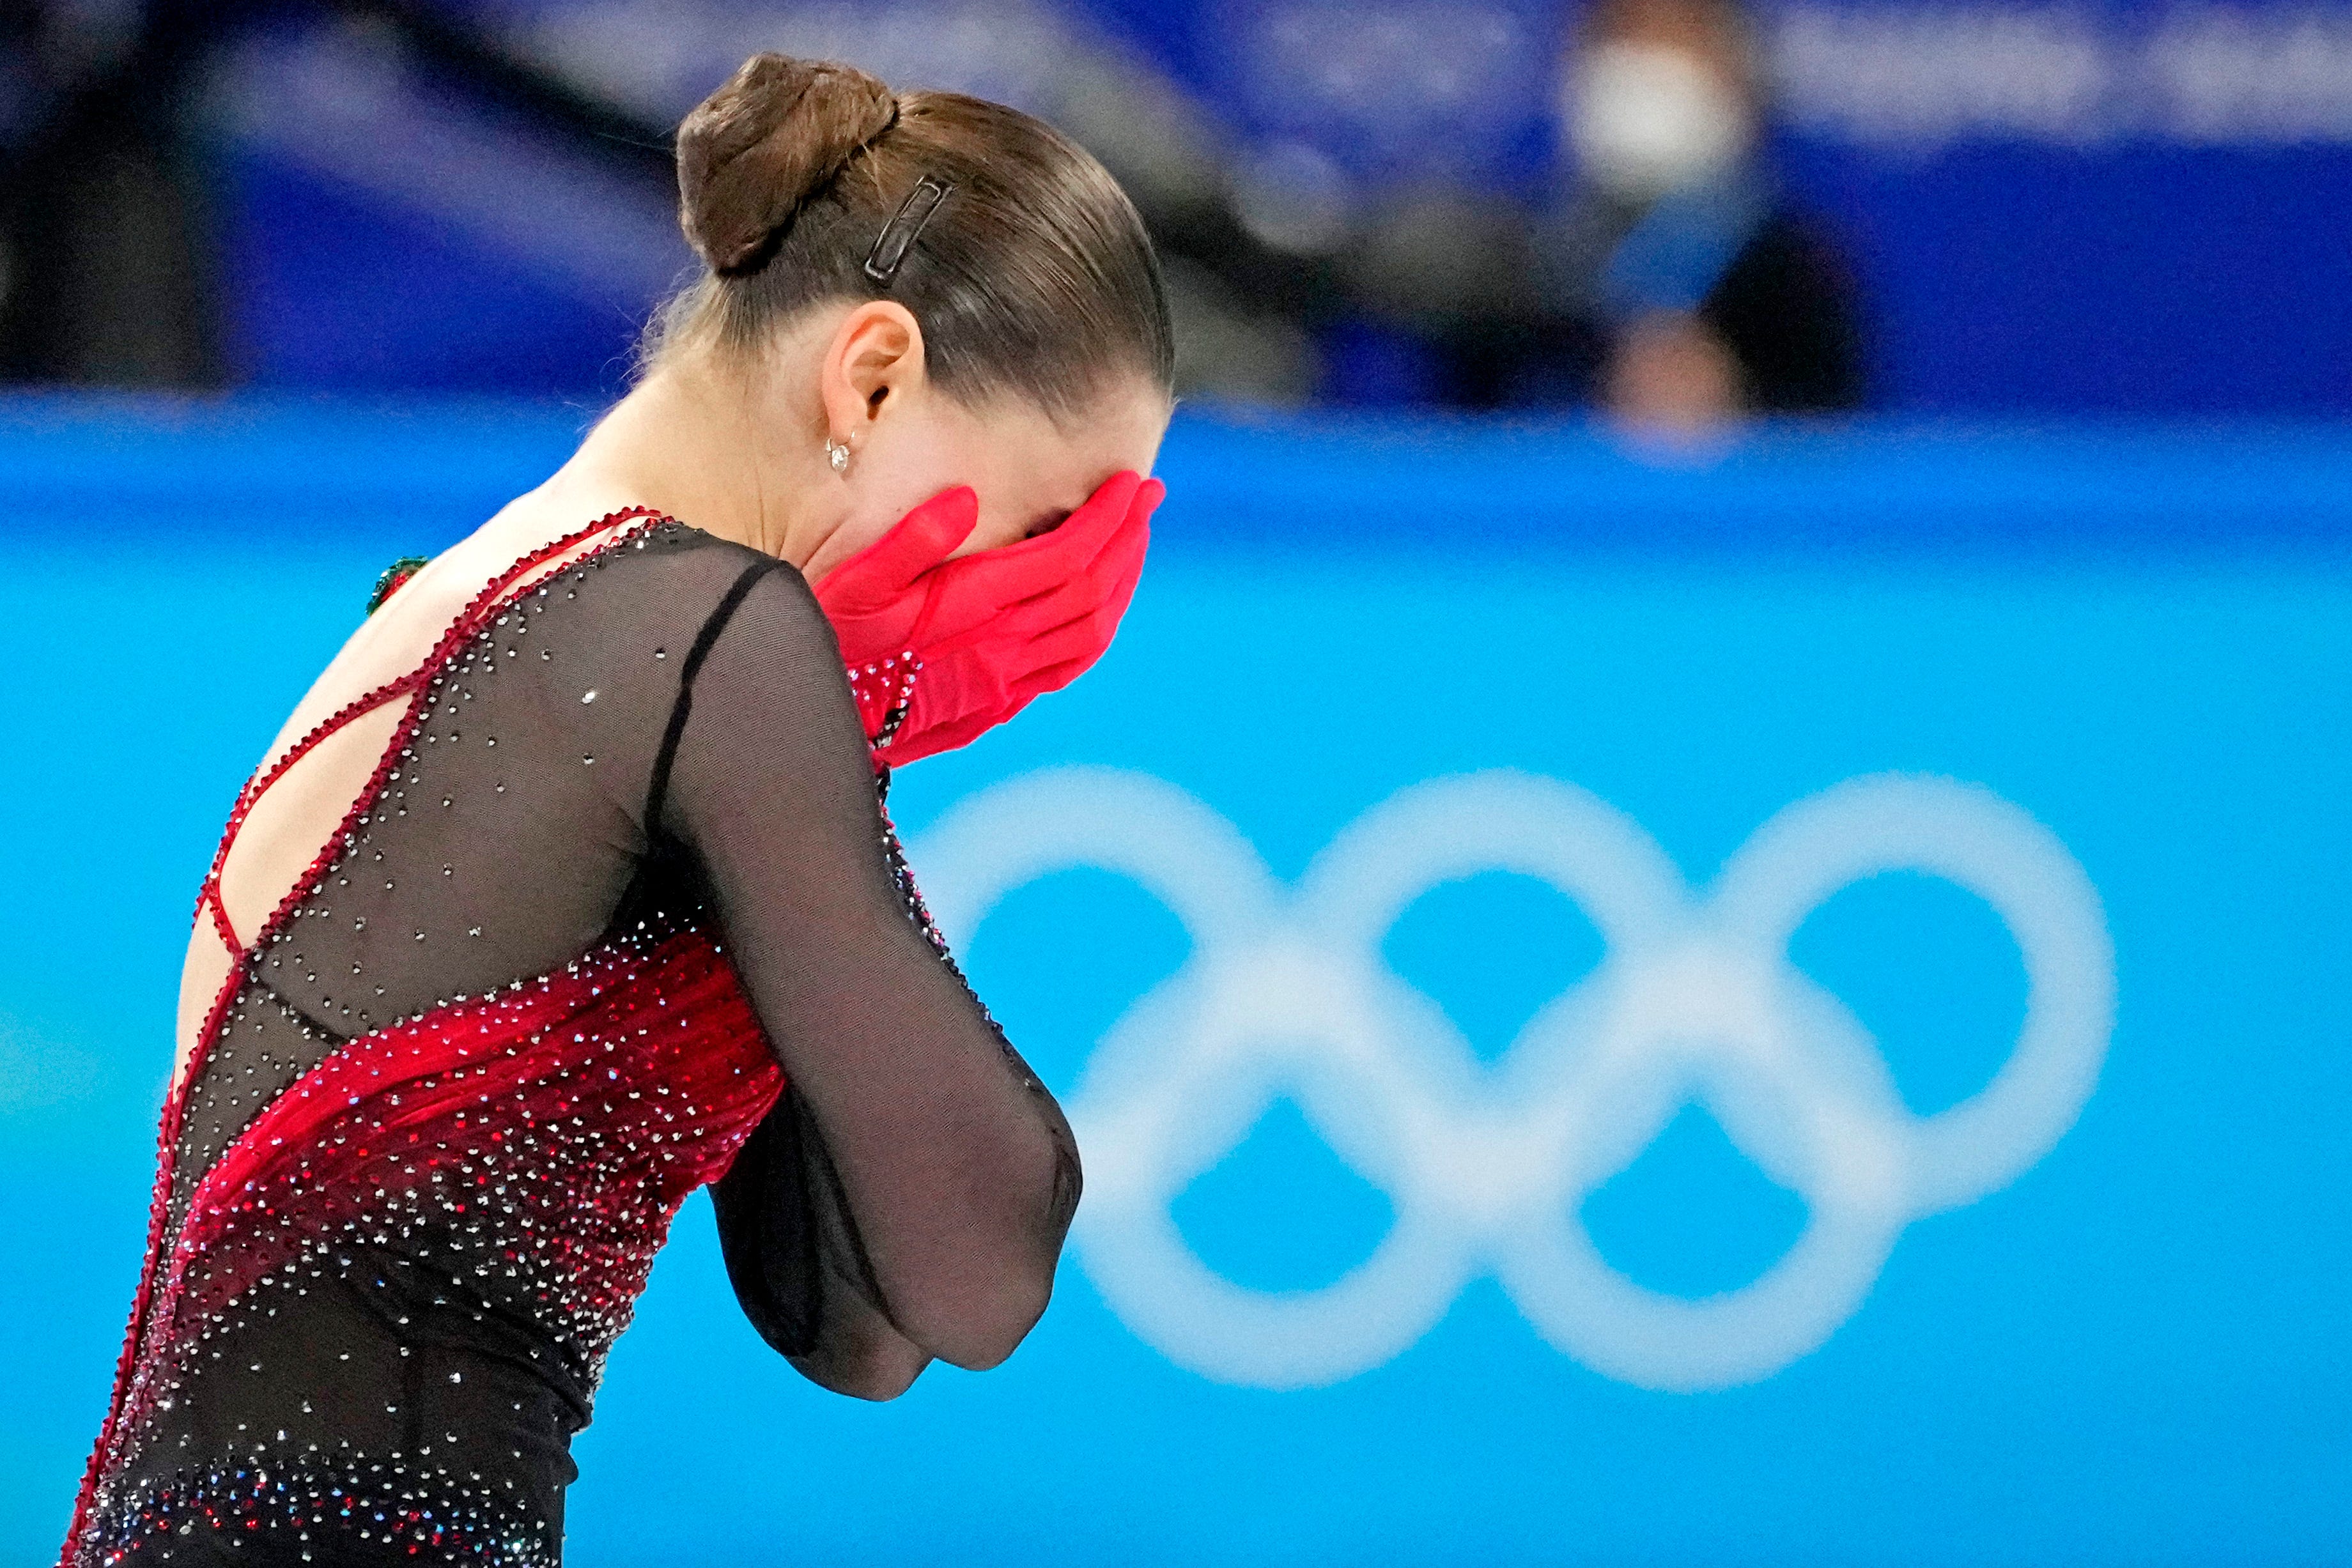 Clubbiness of IOC makes its awful handling of Valieva case even worse | Opinion thumbnail